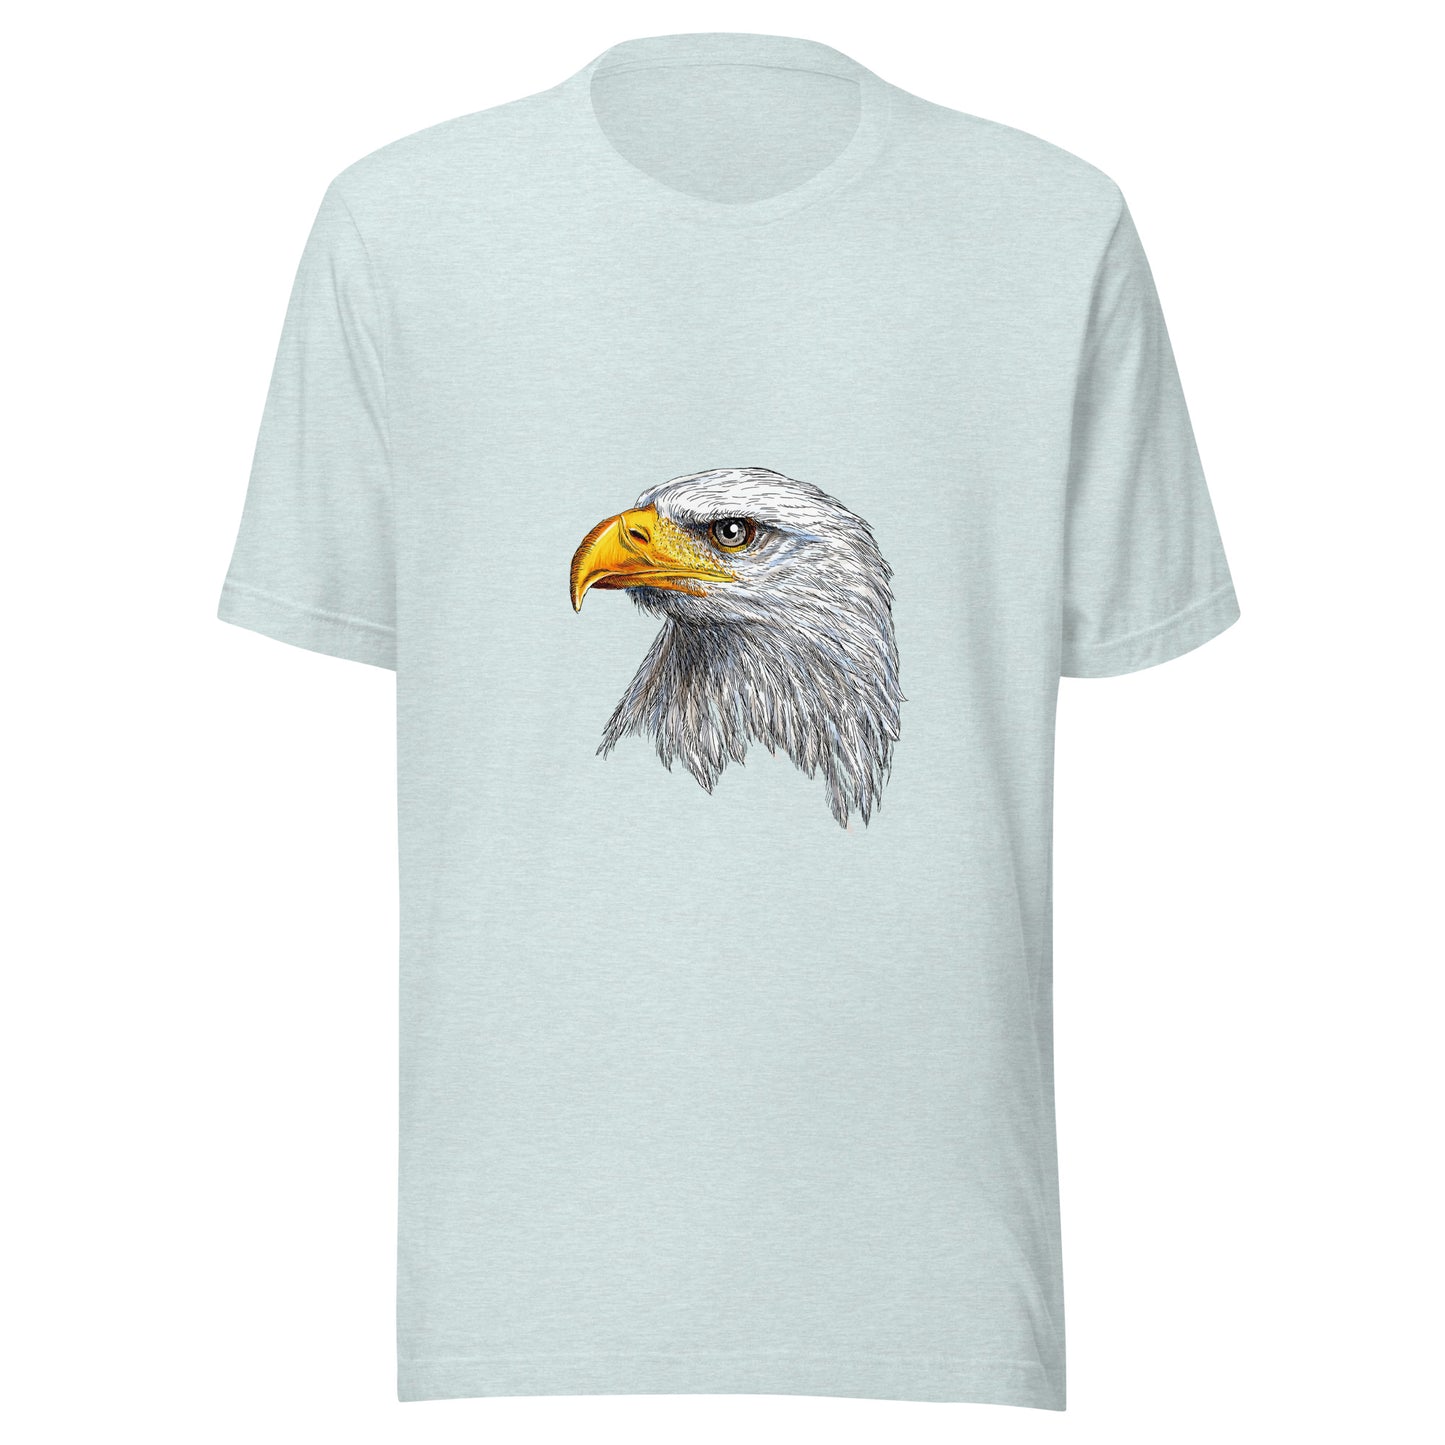 Women and Men's (Unisex) T-Shirt Printed with a Portrait of a Bald Eagle